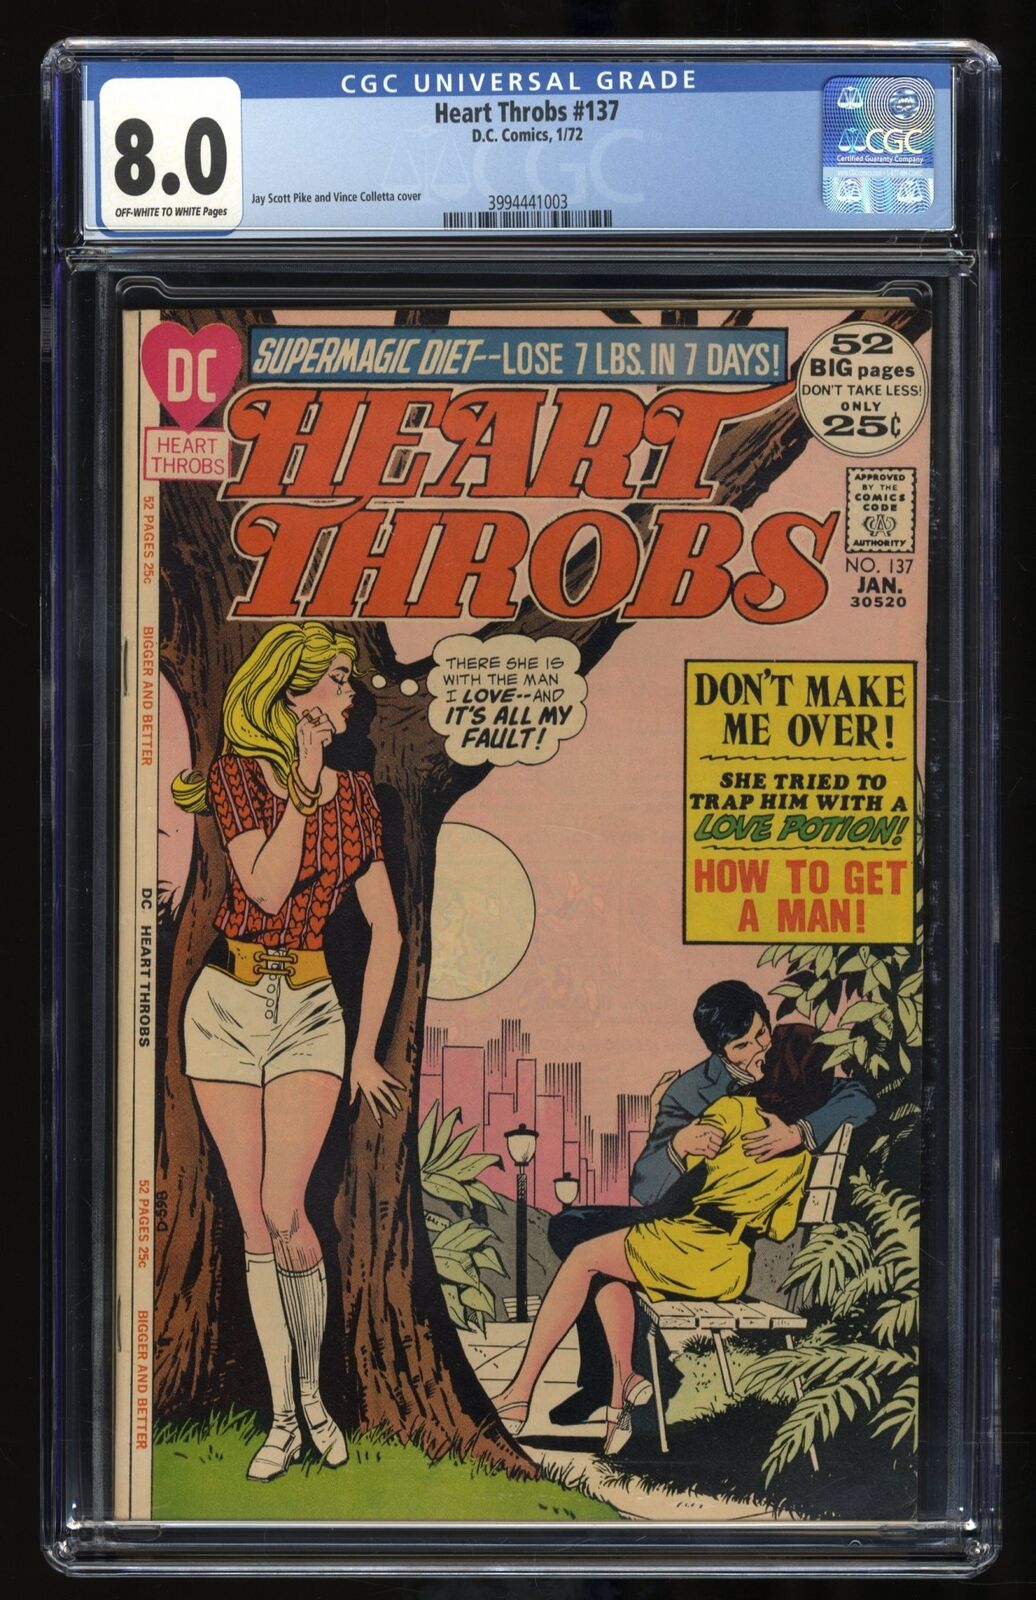 Heart Throbs #137 CGC VF 8.0 Off White to White Vince Colletta Cover DC Comics